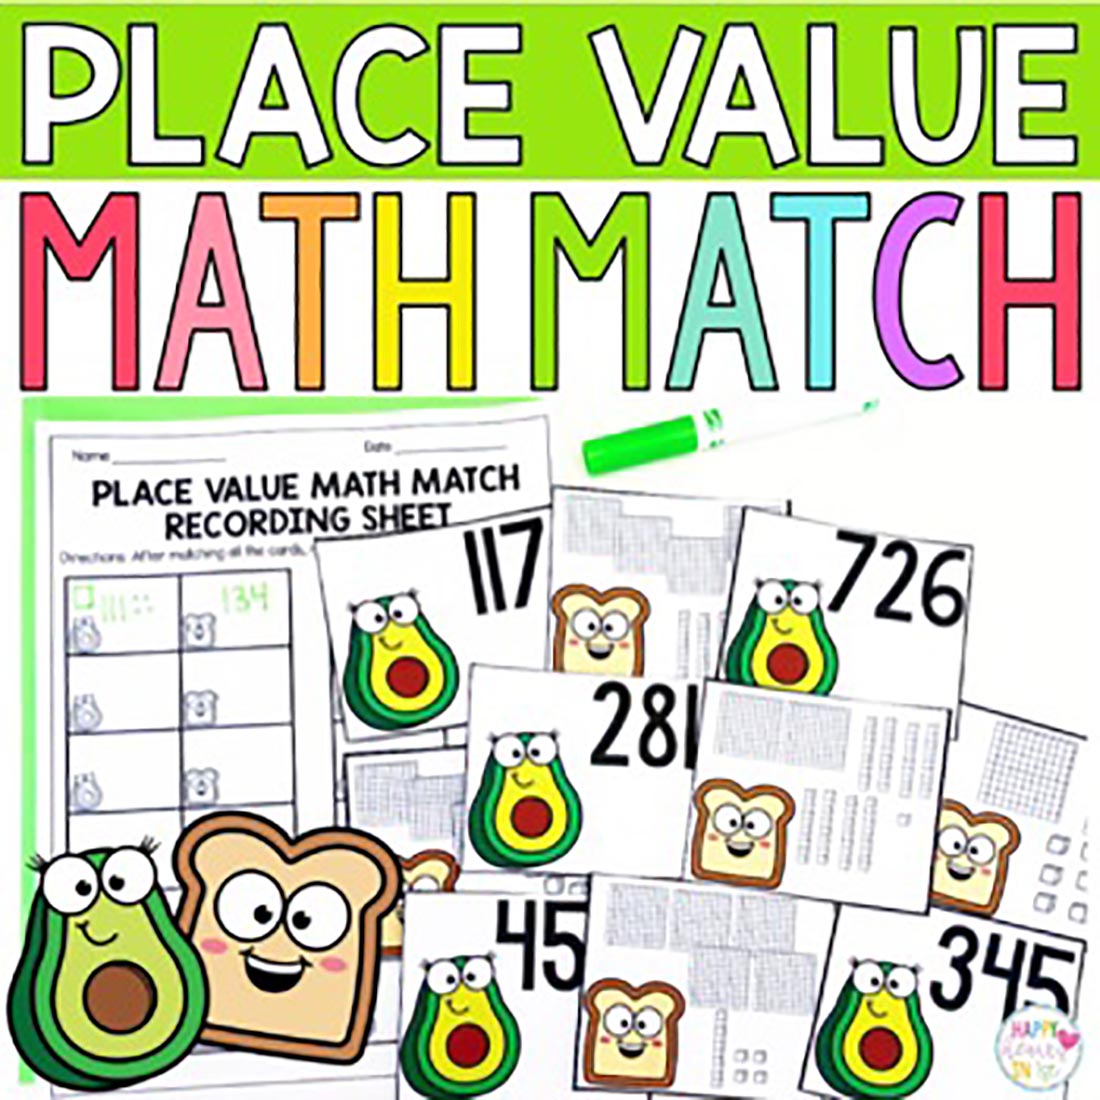 Place Value Memory Match Math Game Center Activity cover image.